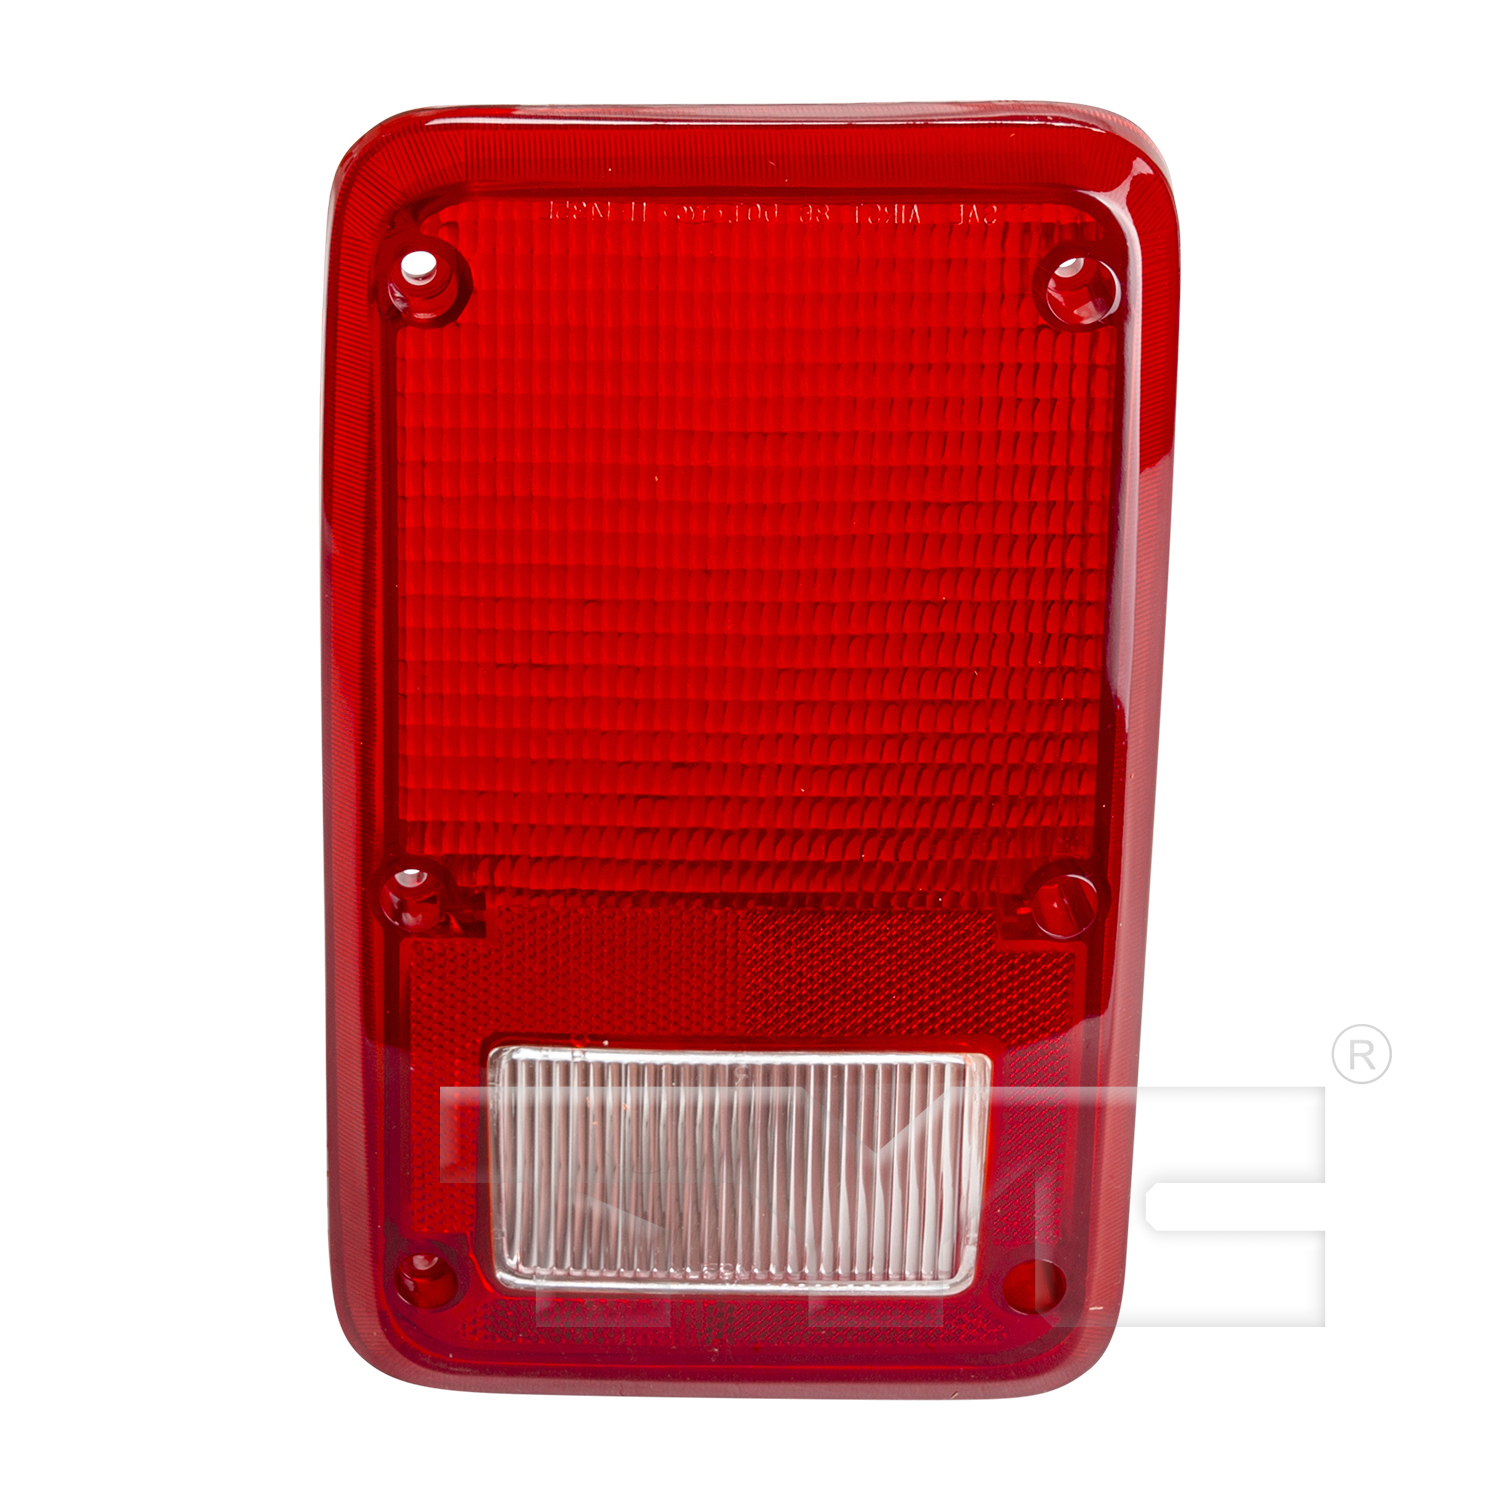 Aftermarket TAILLIGHTS for DODGE - B300, B300,78-80,LT Taillamp lens